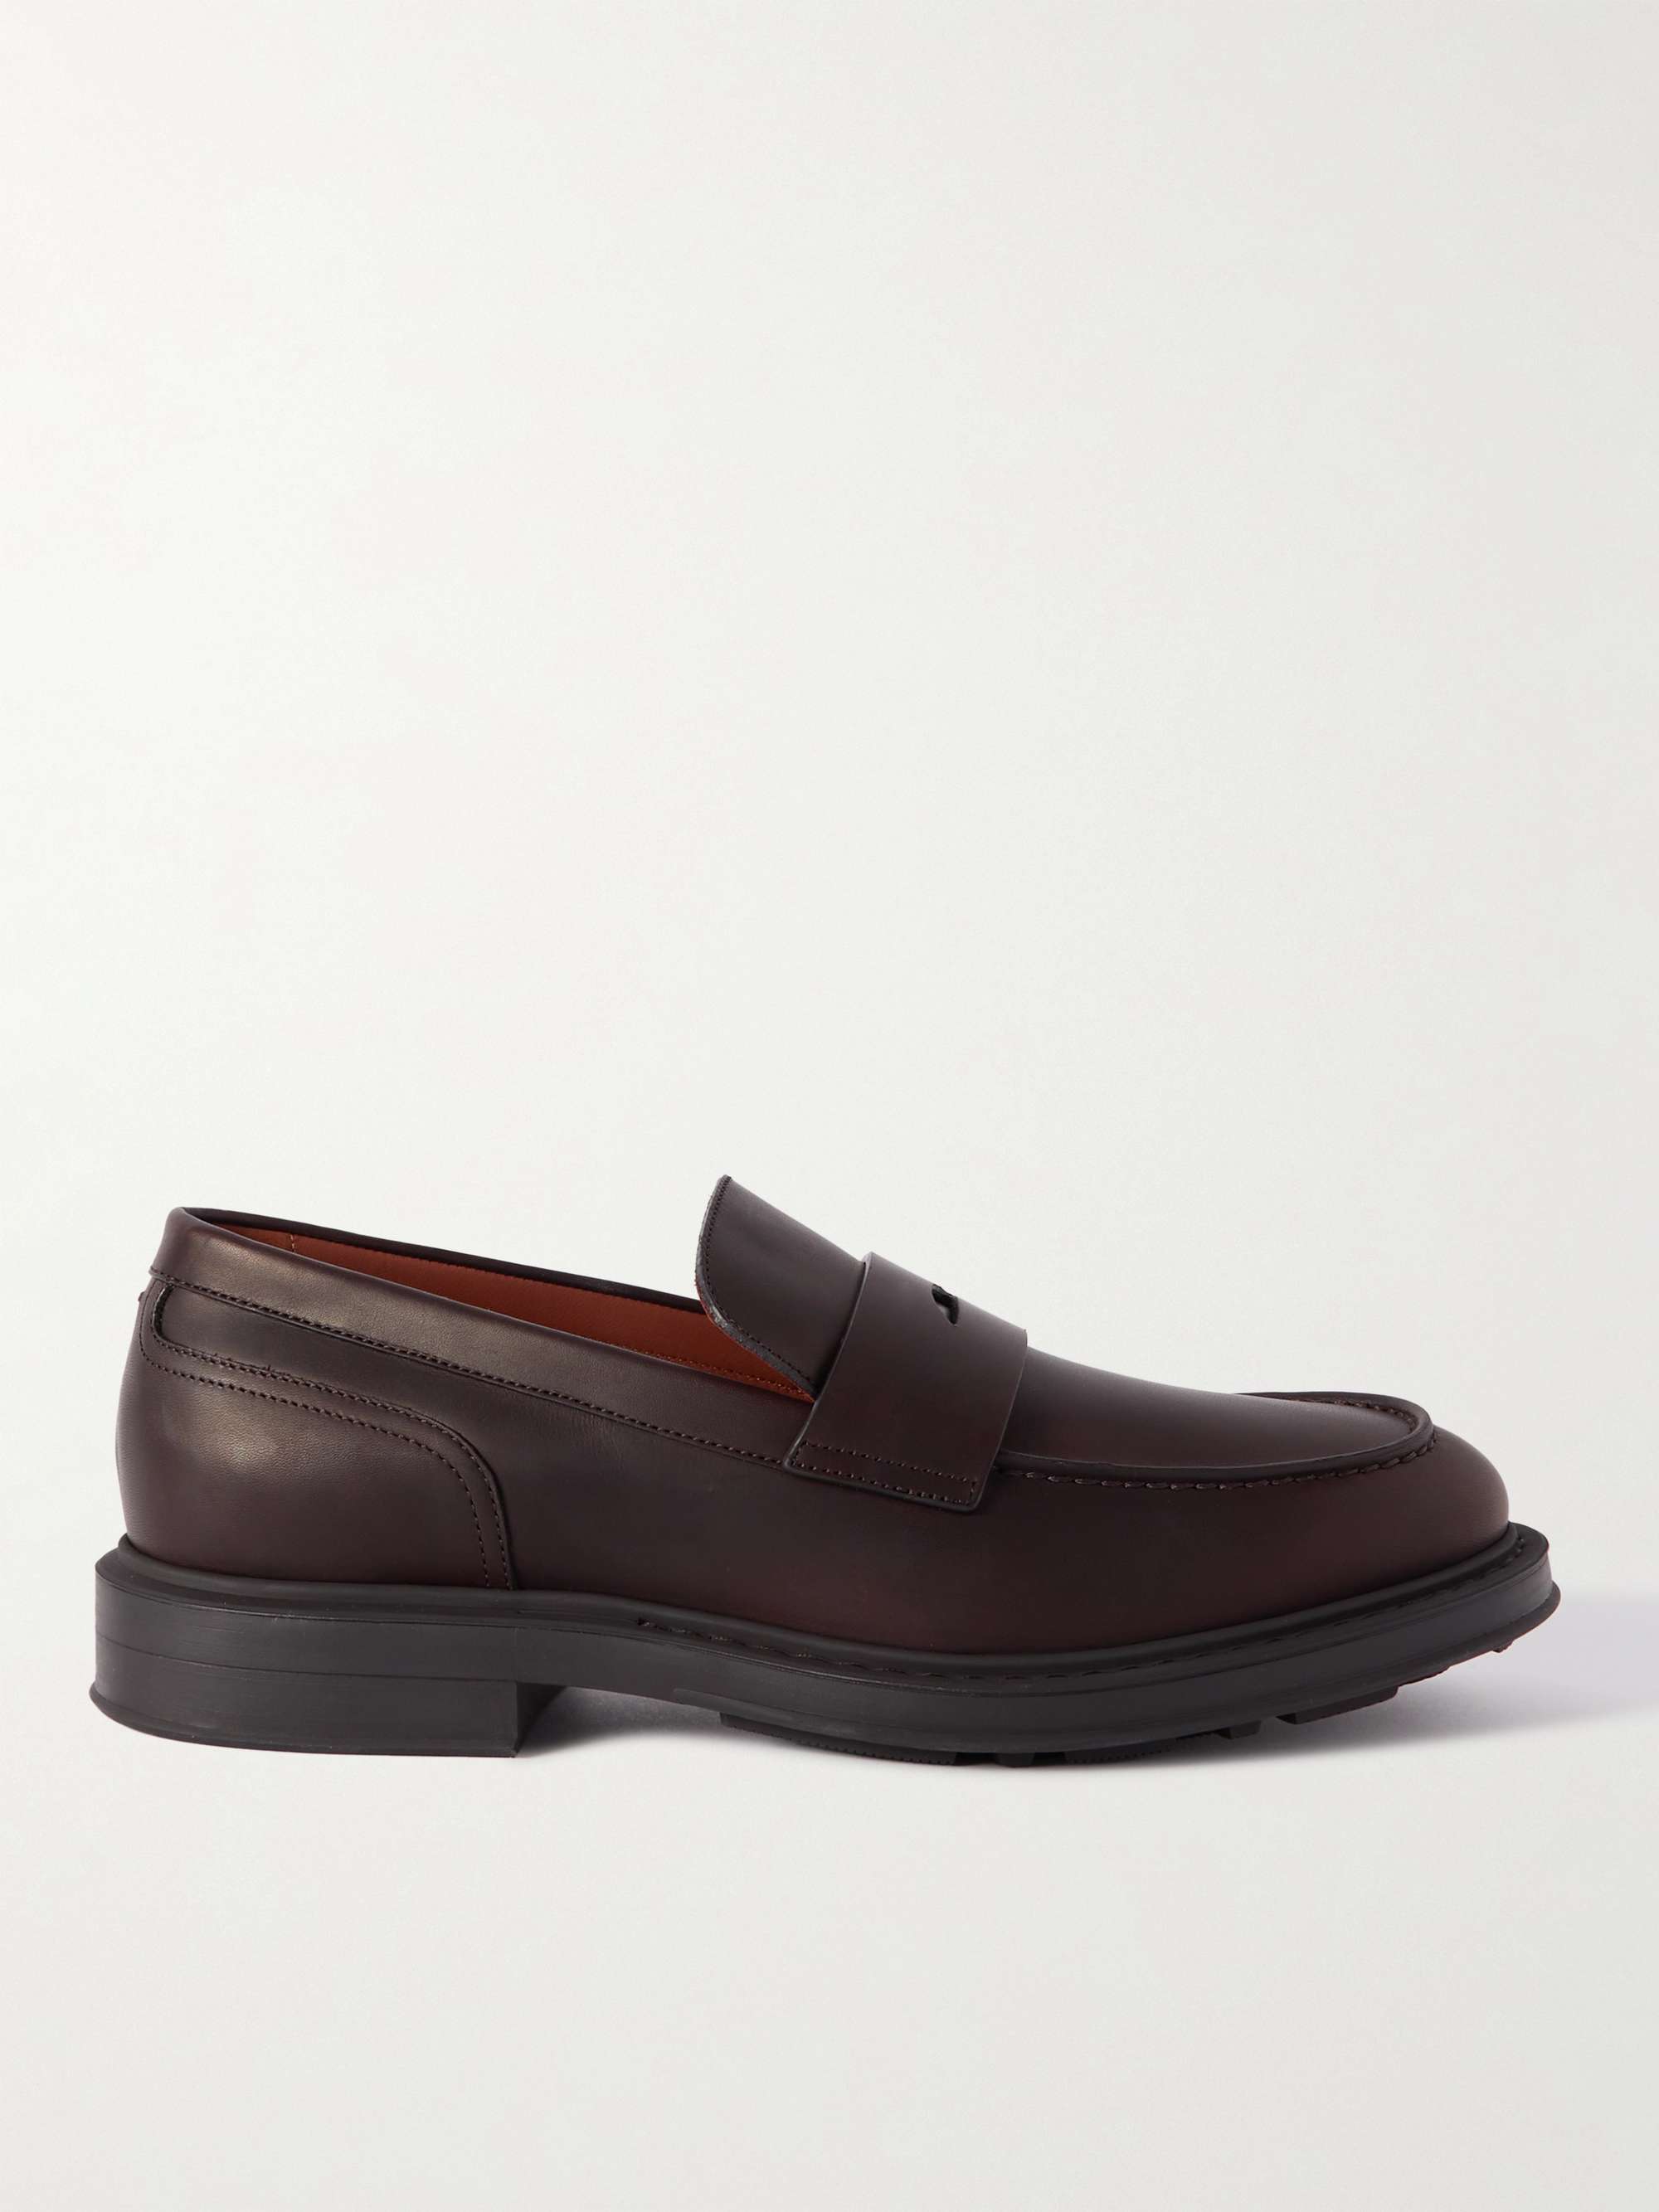 LORO PIANA Travis Leather Penny Loafers for Men | MR PORTER